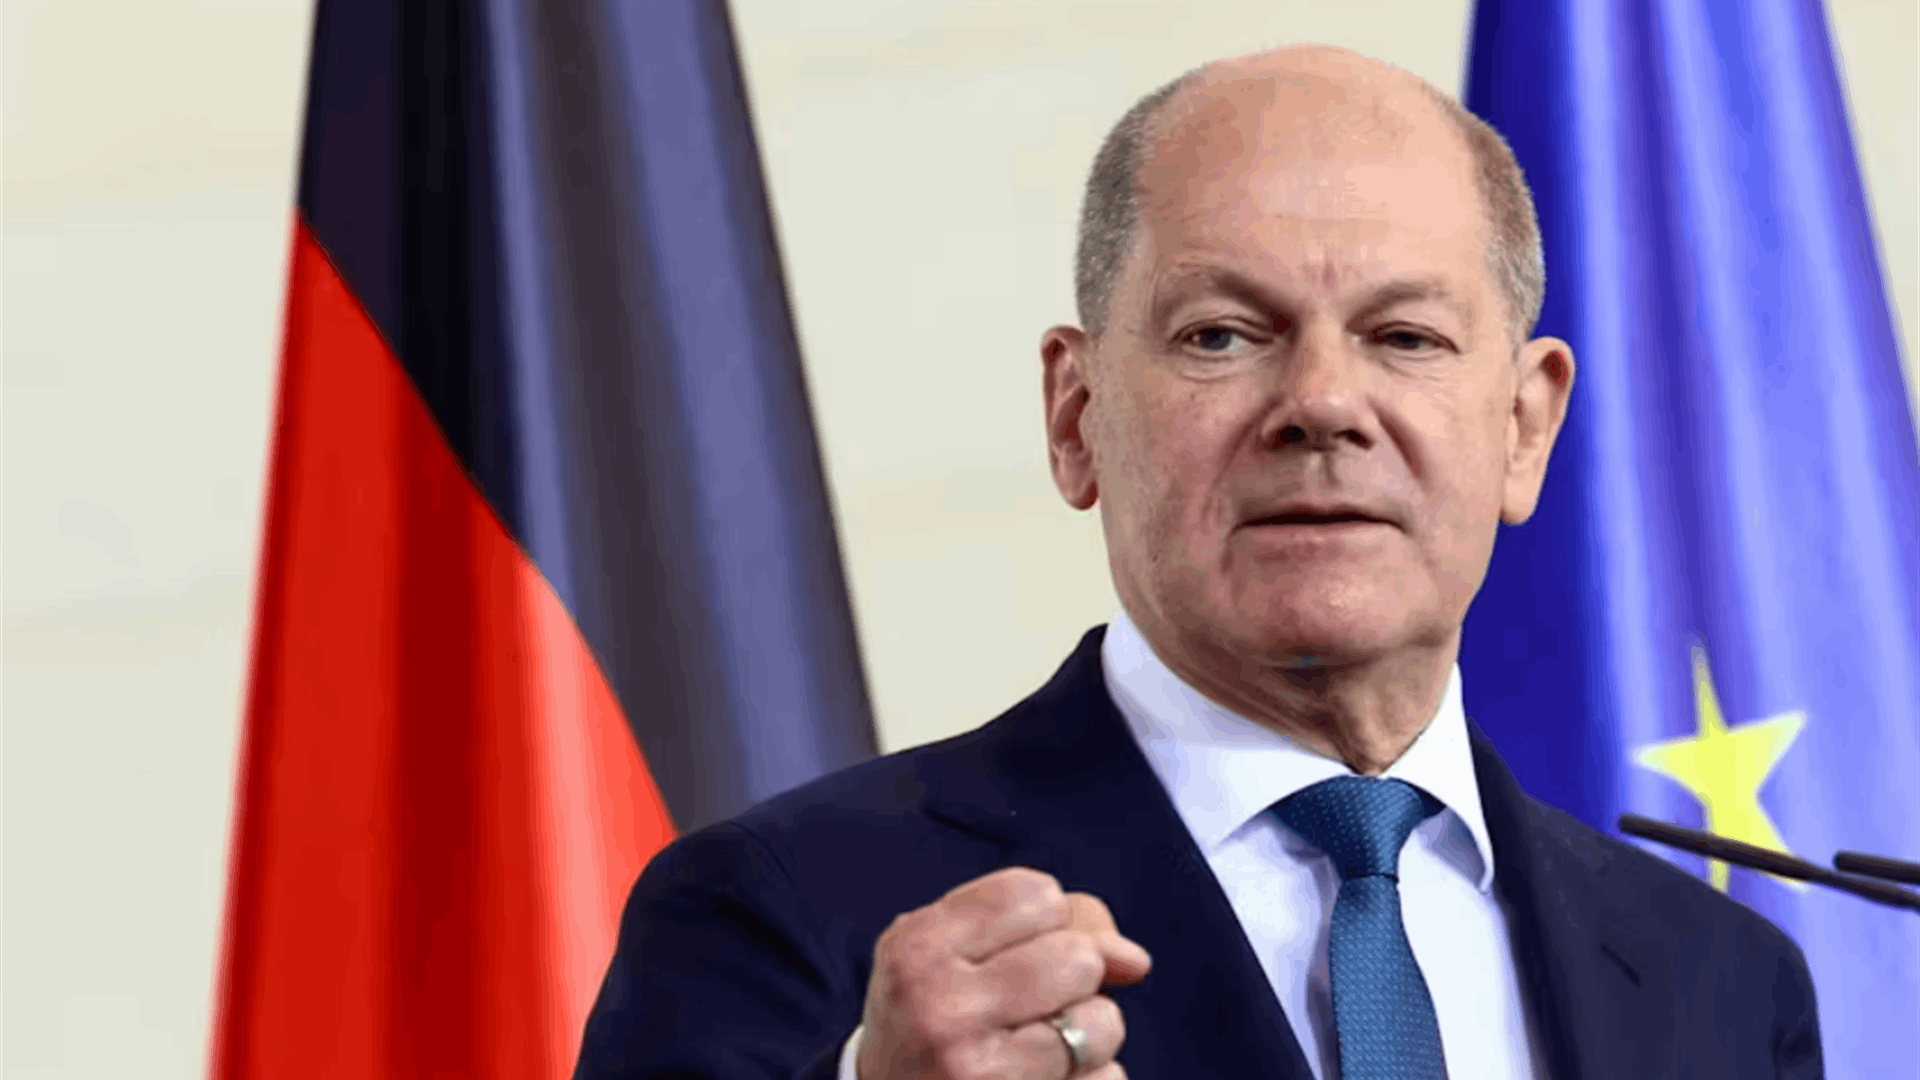 Germany&#39;s Scholz: Rafah assault would make regional peace &#39;very difficult&#39;